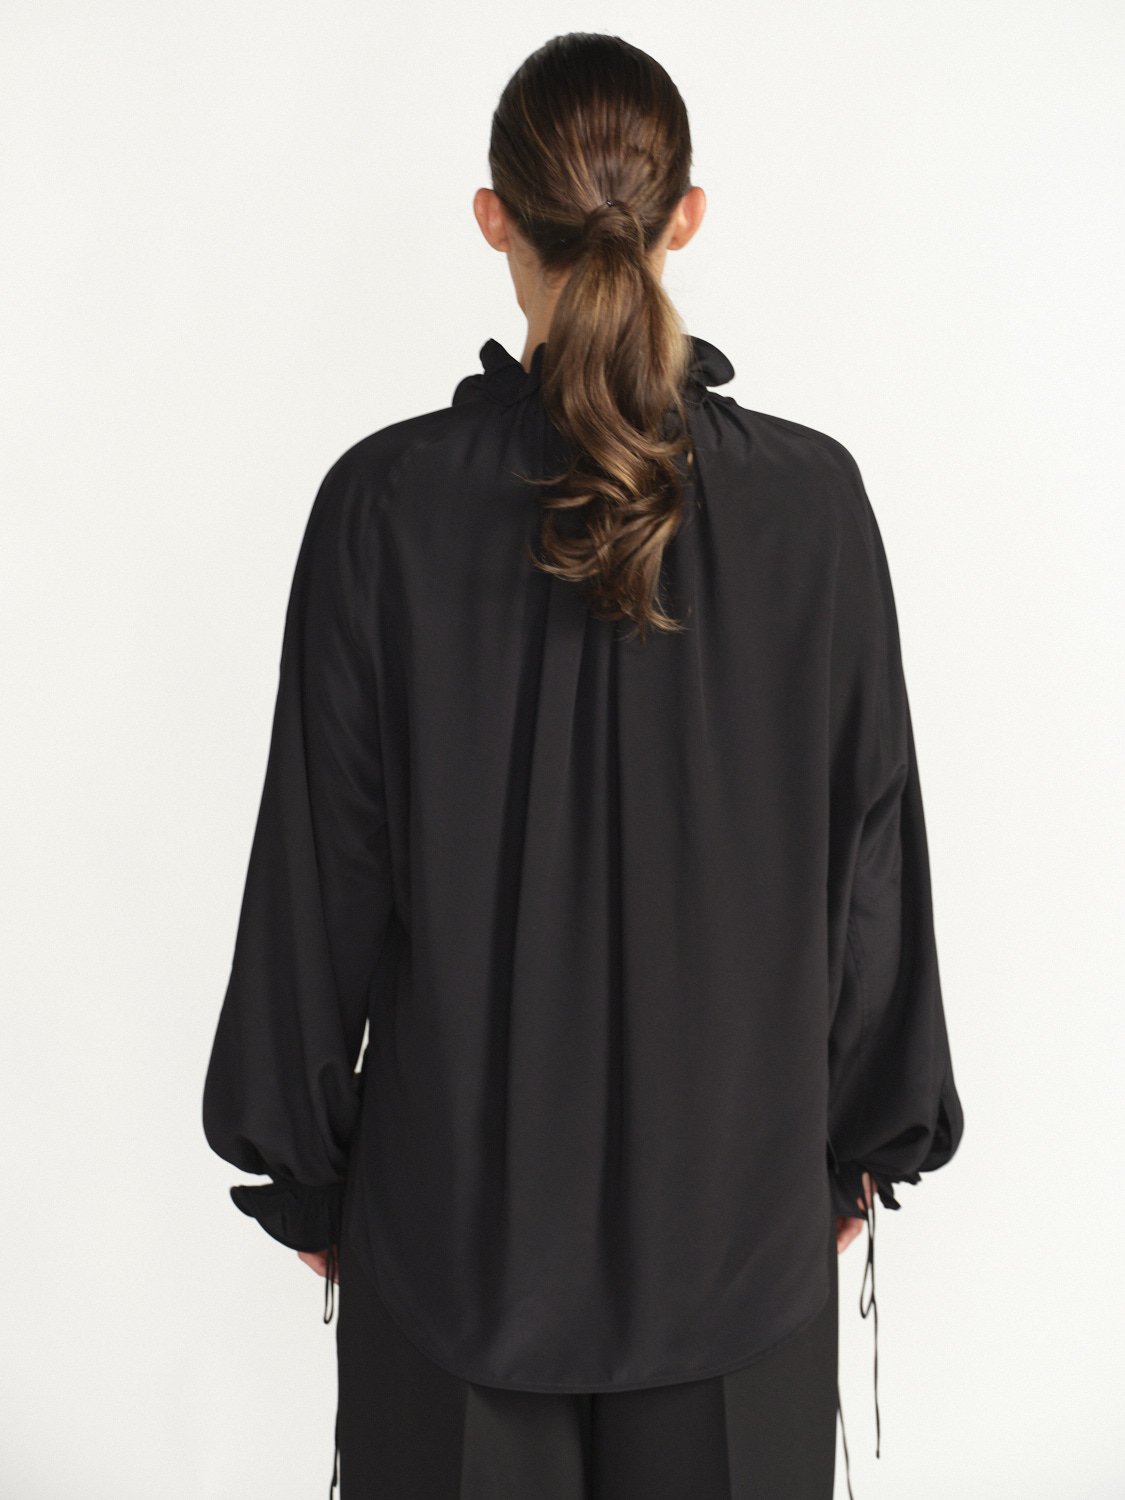 Victoria Beckham Ruched Detail Blouse - Long Sleeve Blouse with Ruched Details made of Silk black 36